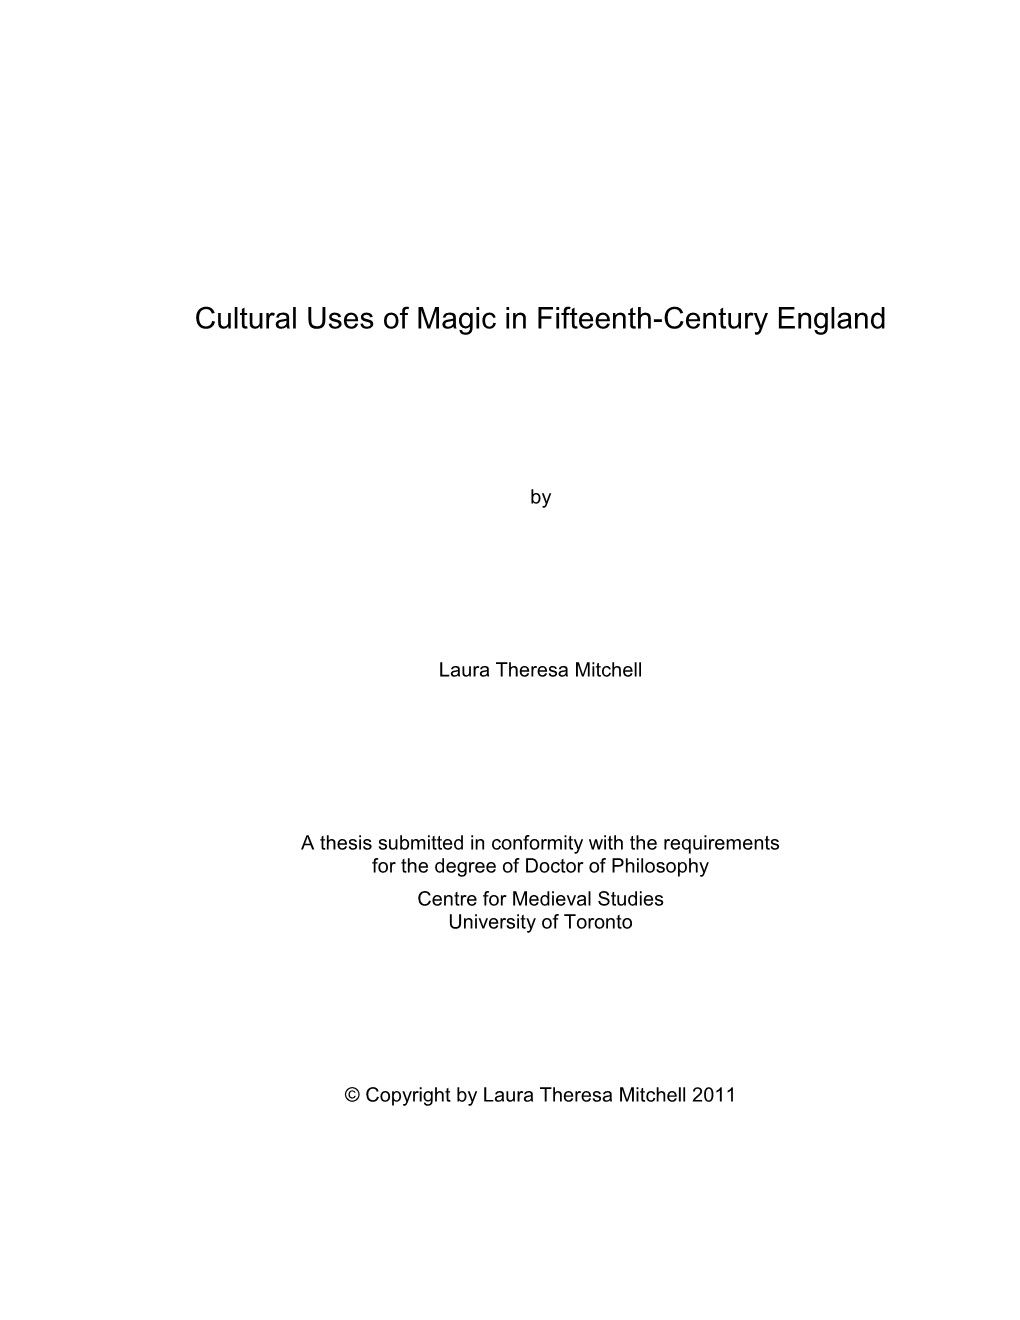 Cultural Uses of Magic in Fifteenth-Century England